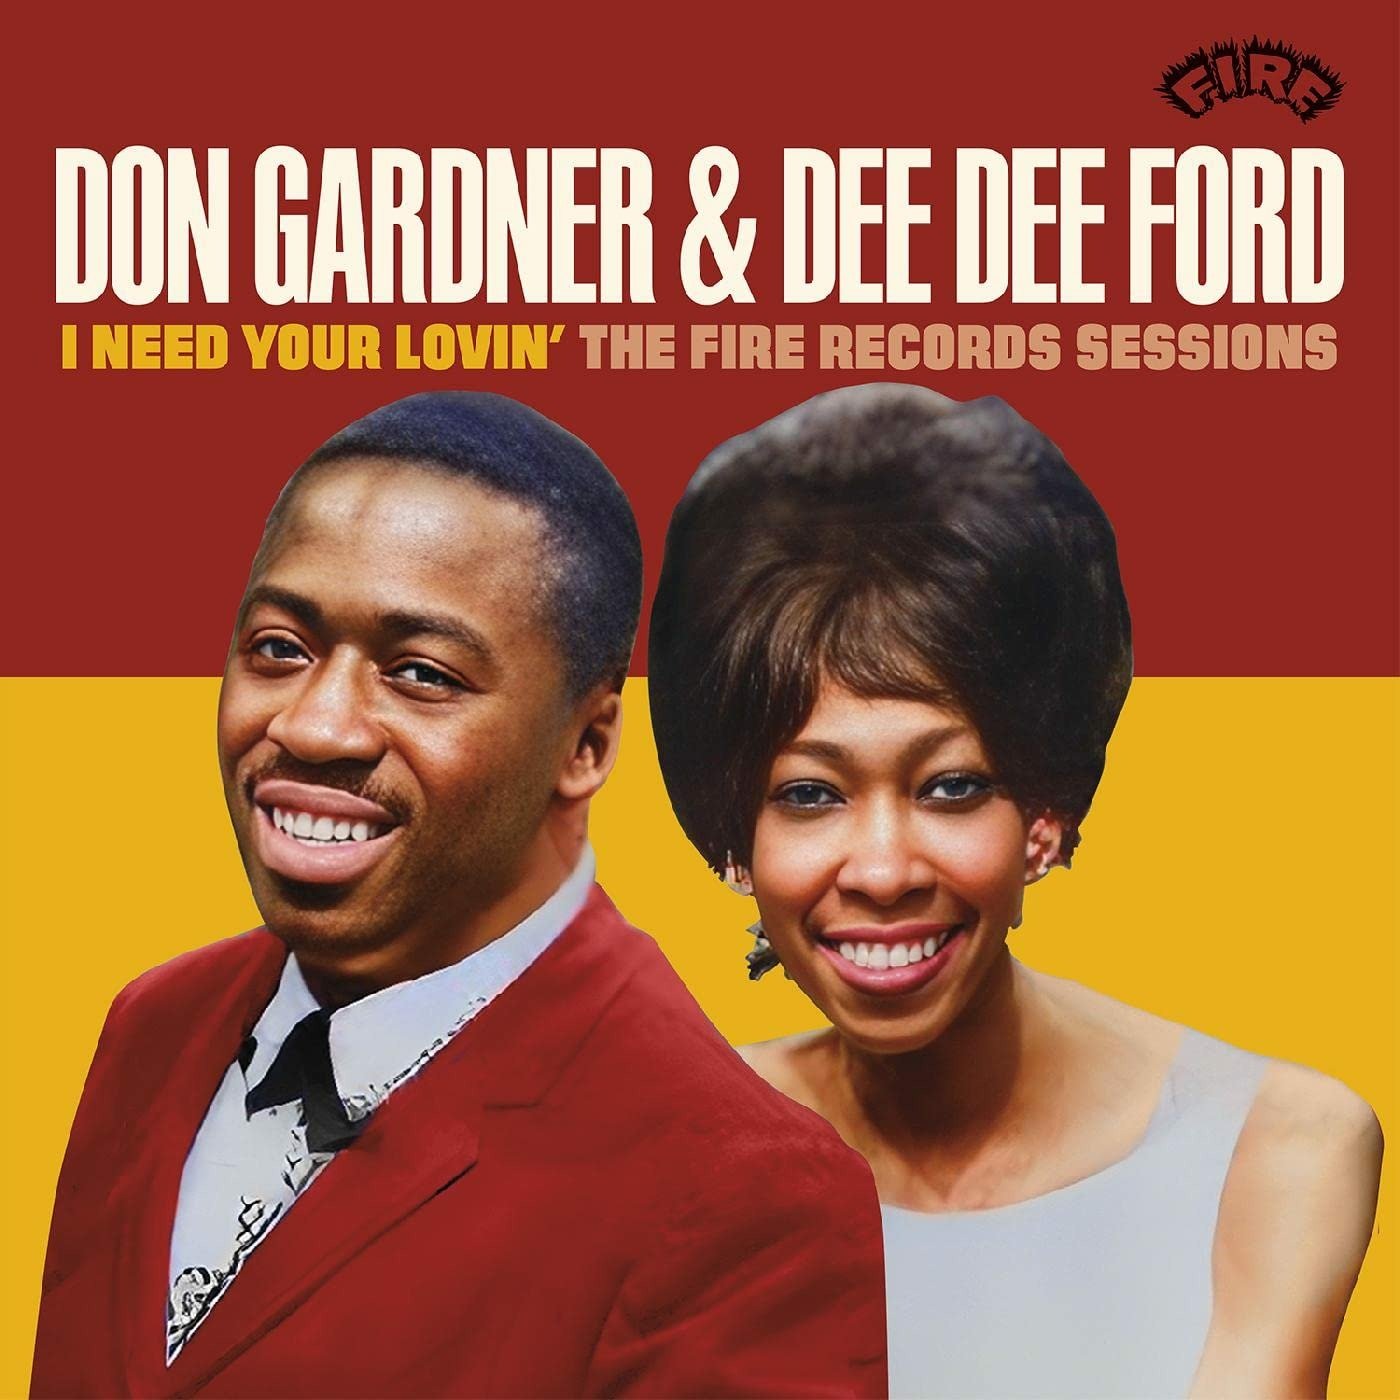 CD Shop - GARDNER, DON & DEE DEE FORD I NEED YOUR LOVIN\